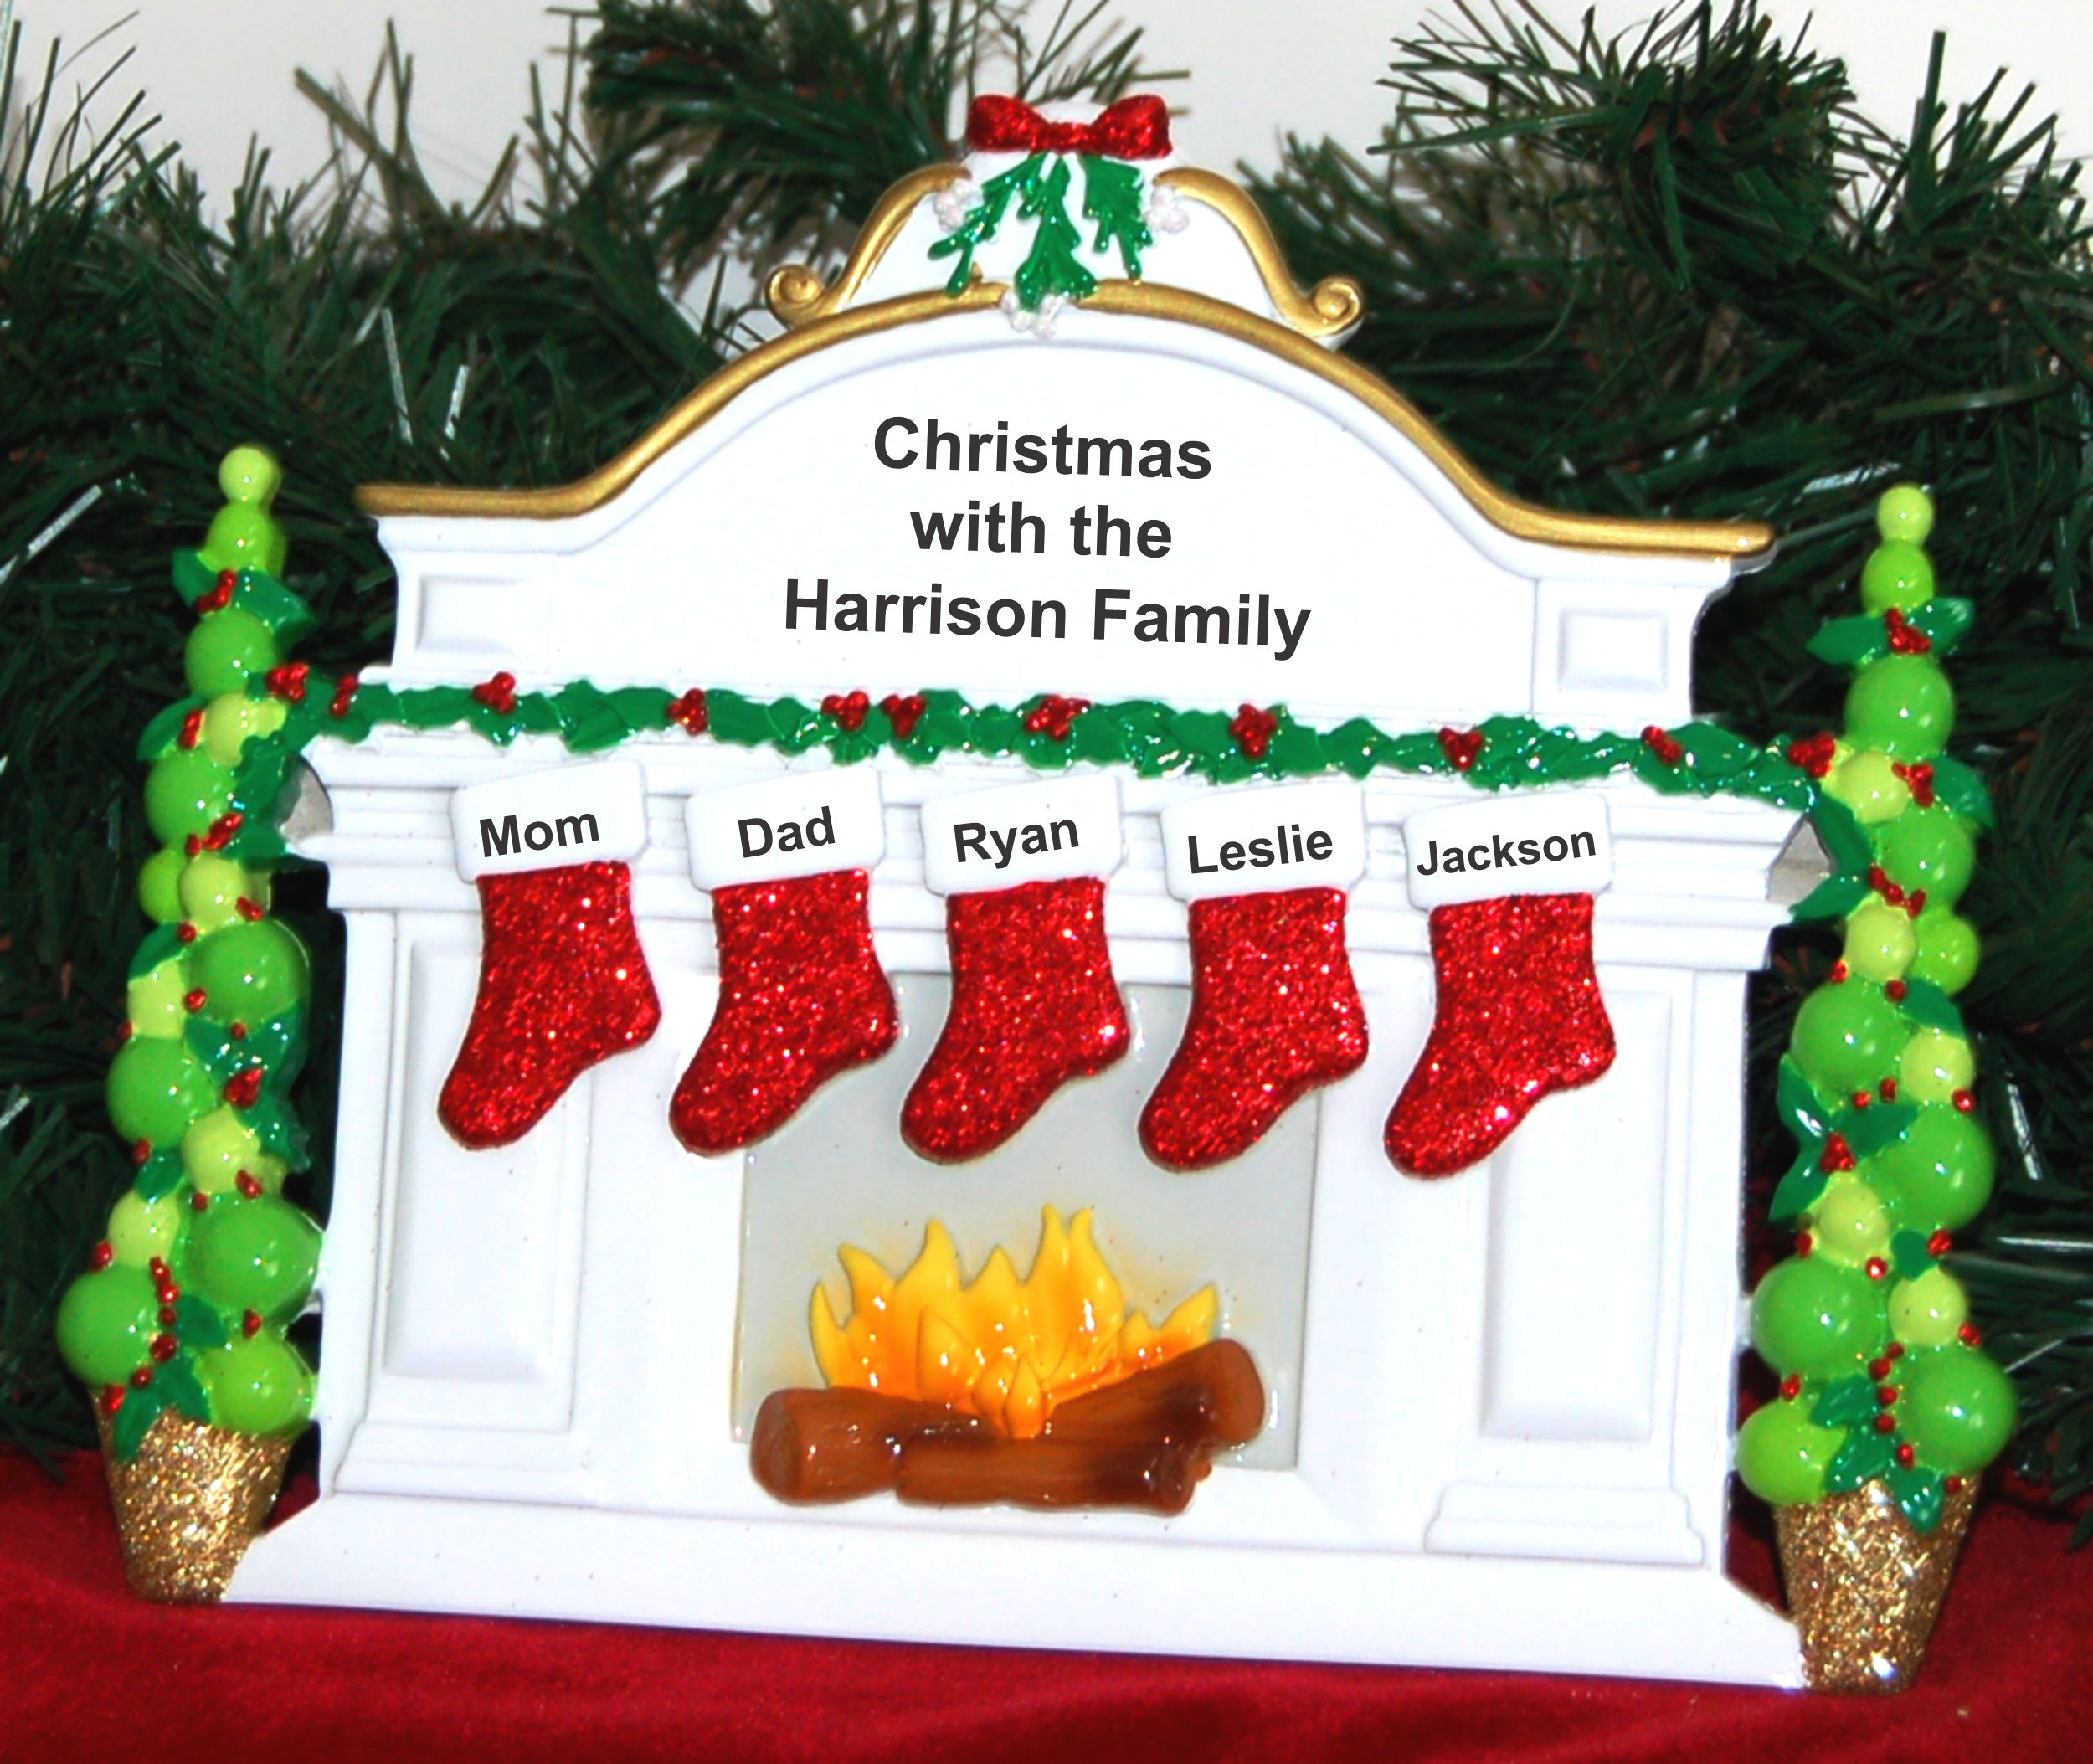 Family Tabletop Christmas Decoration for 5 Personalized by RussellRhodes.com